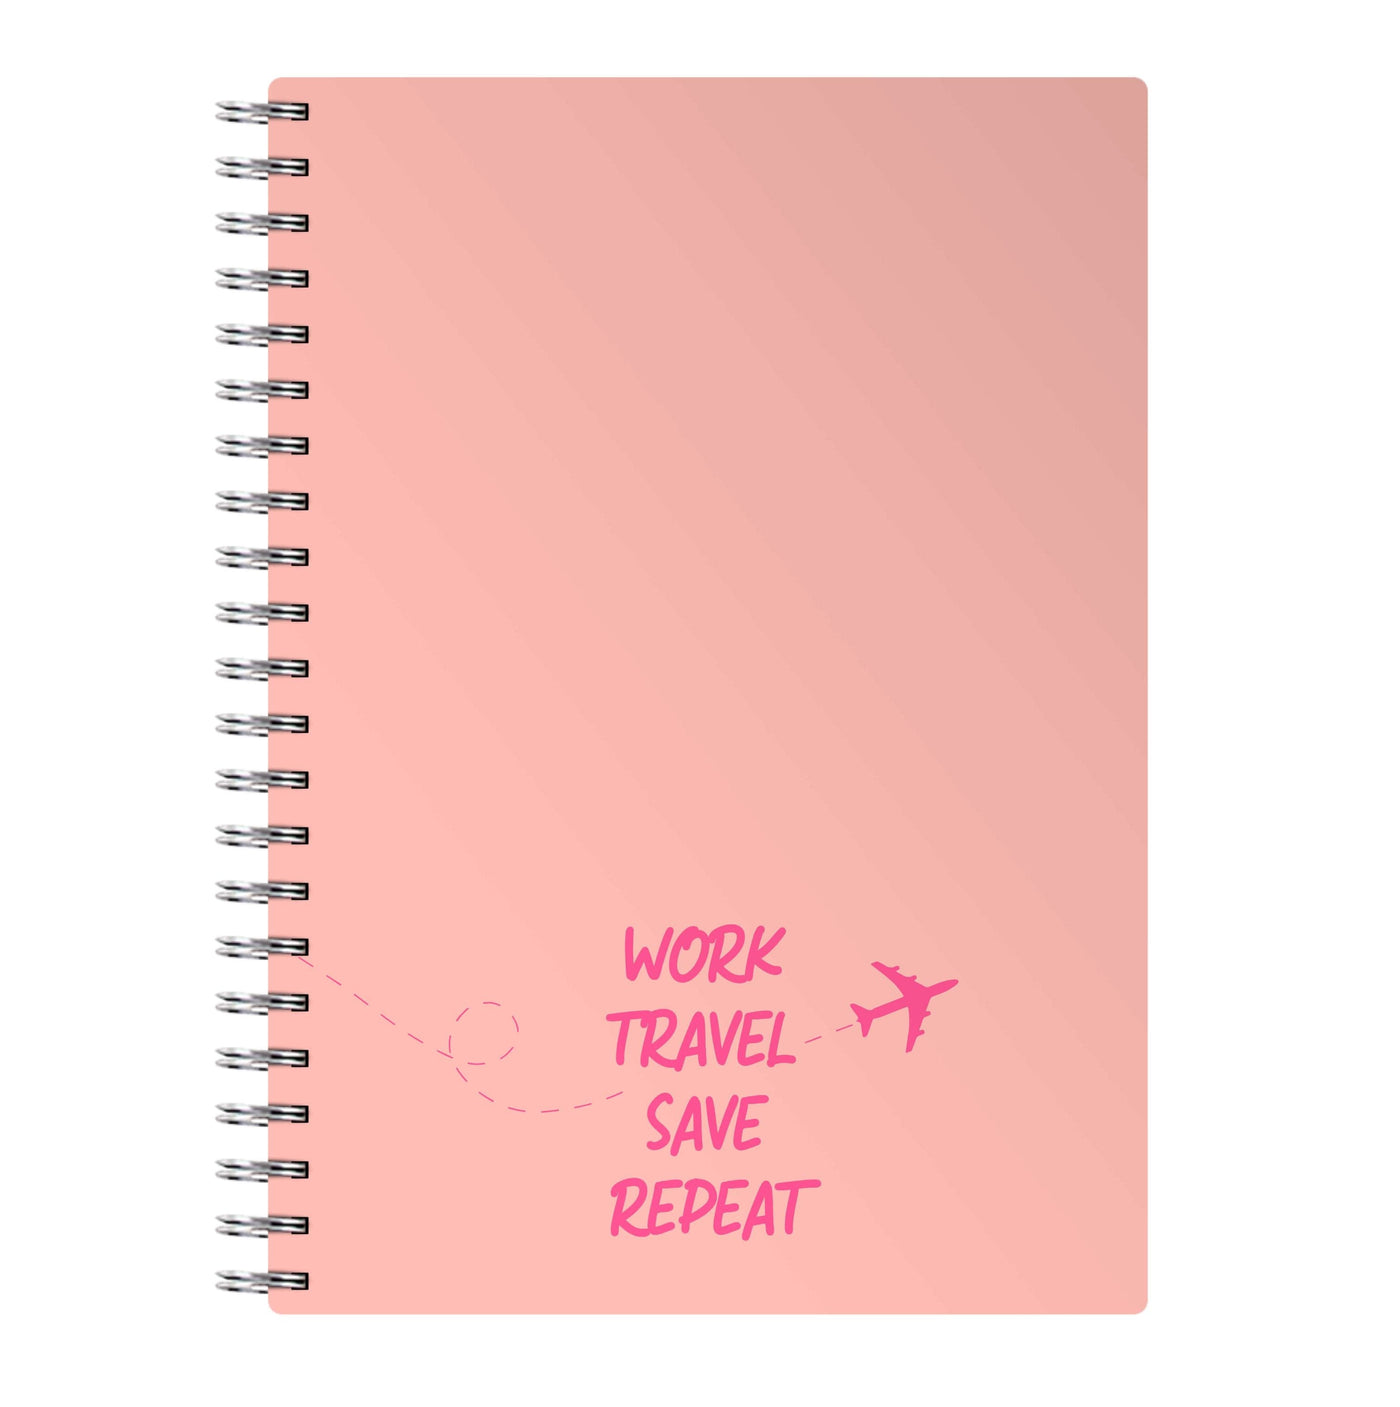 Work Travel Save Repeat - Travel Notebook